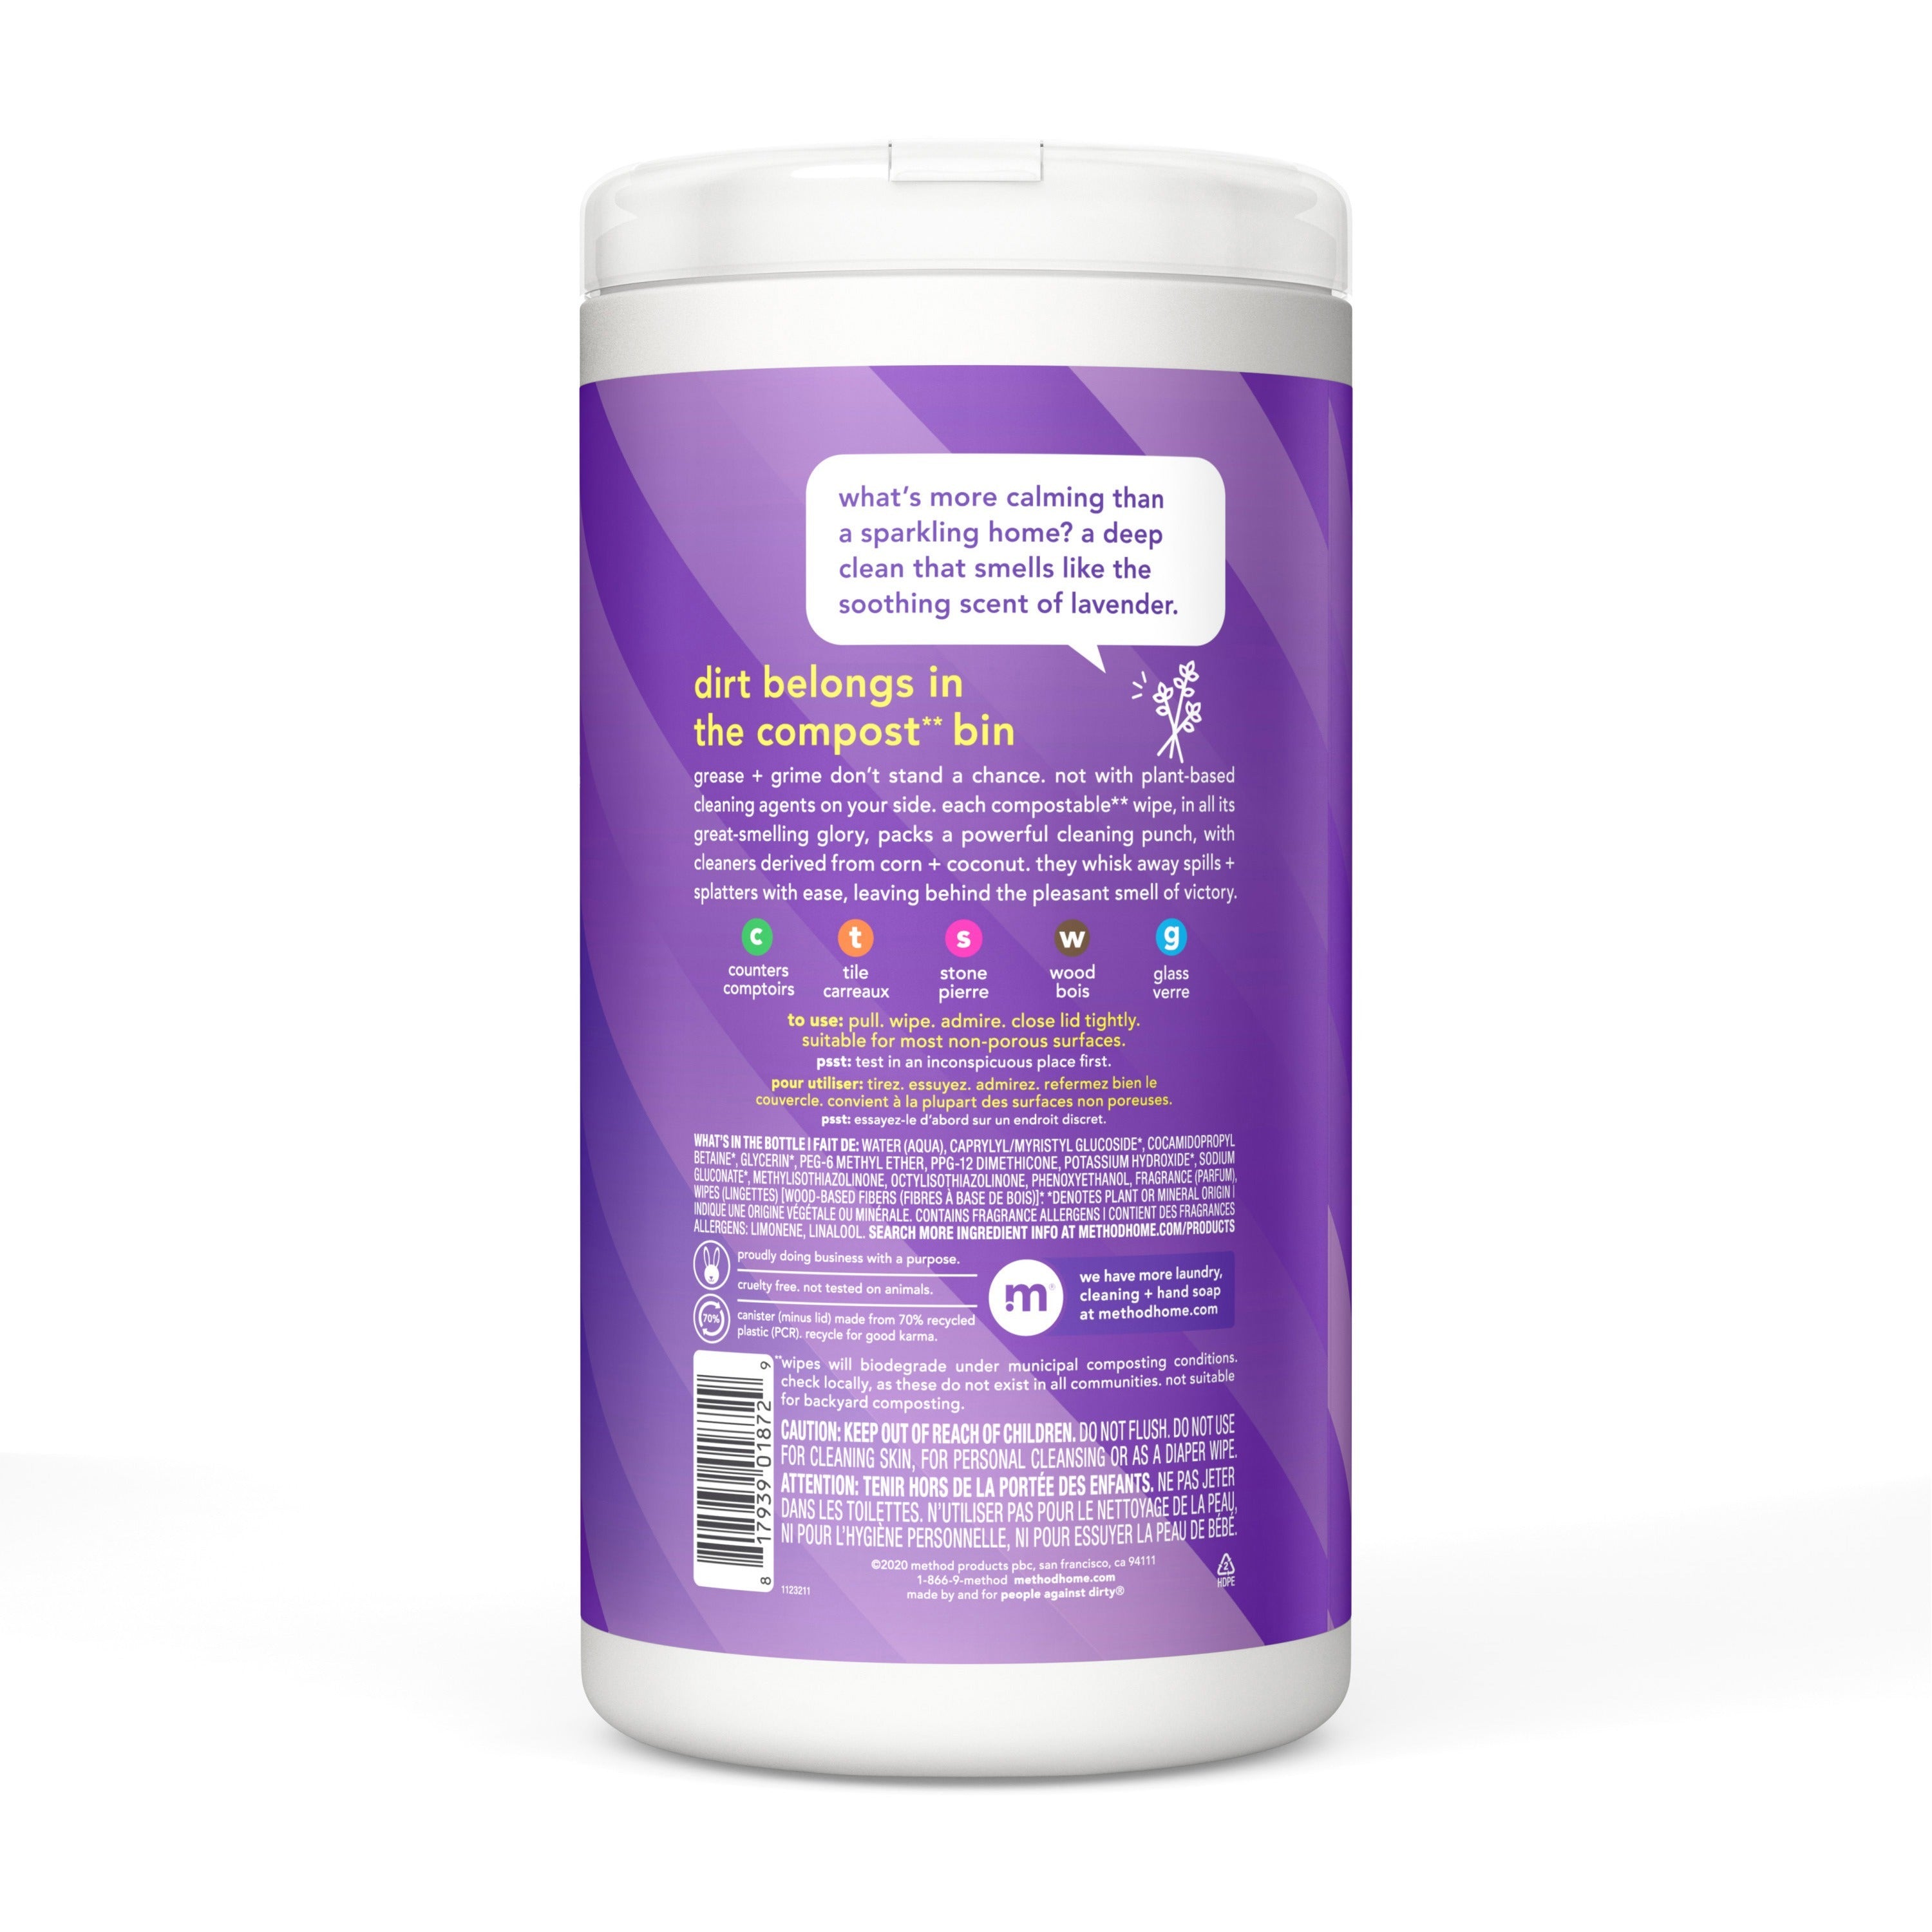 method-all-purpose-cleaning-wipes-french-lavender-scent-70-tub-1-each-pleasant-scent-purple_mth338520 - 2